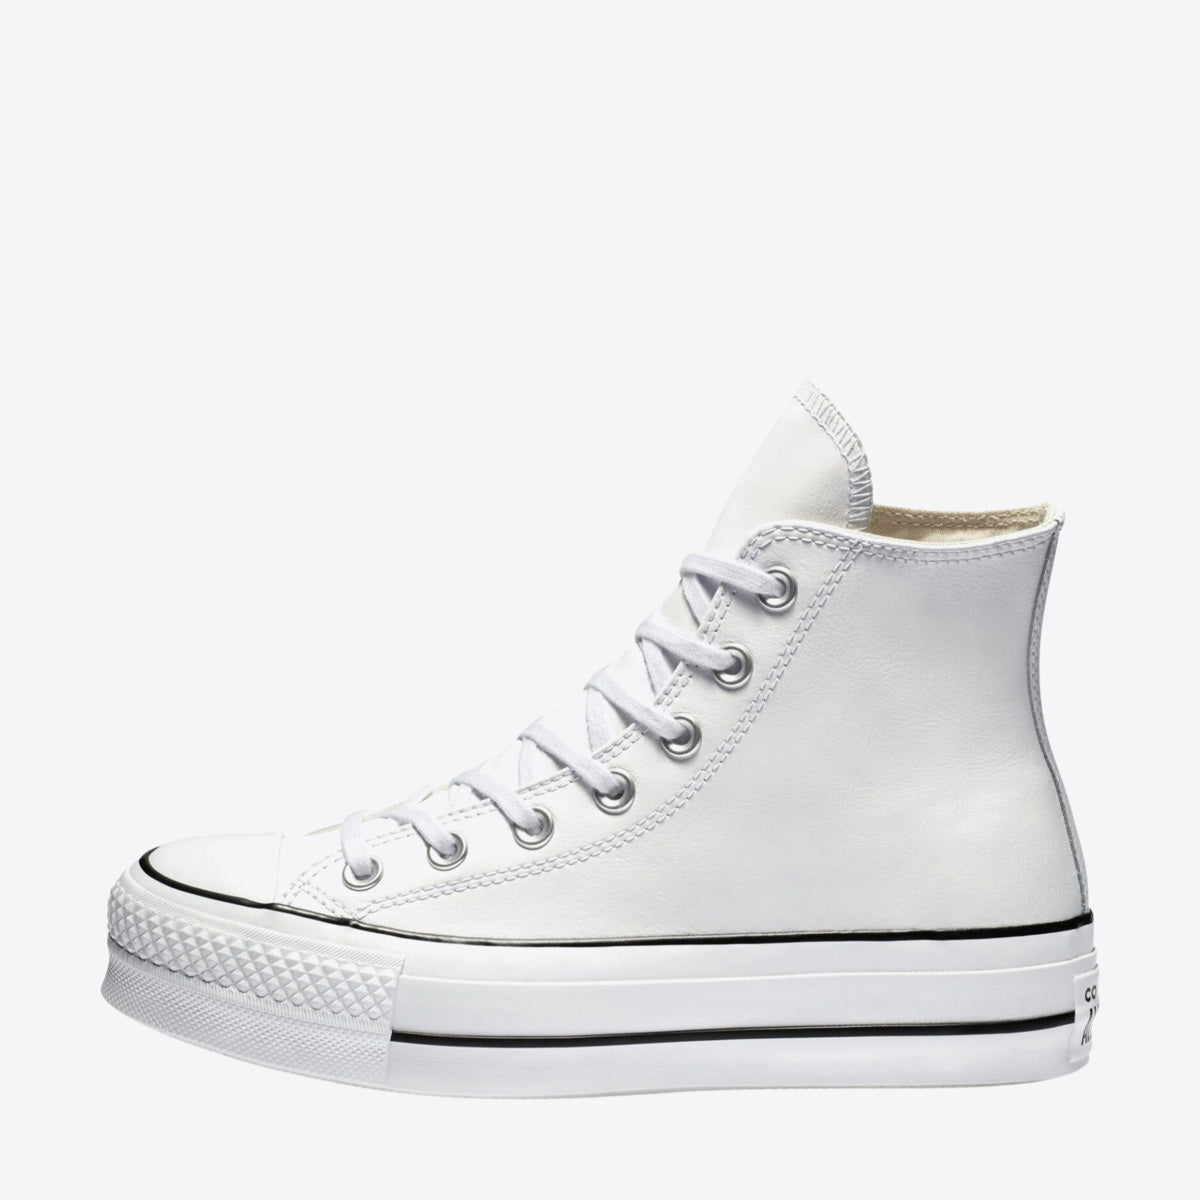 CONVERSE Chuck Taylor All Star Lift High White Leather - Image 4